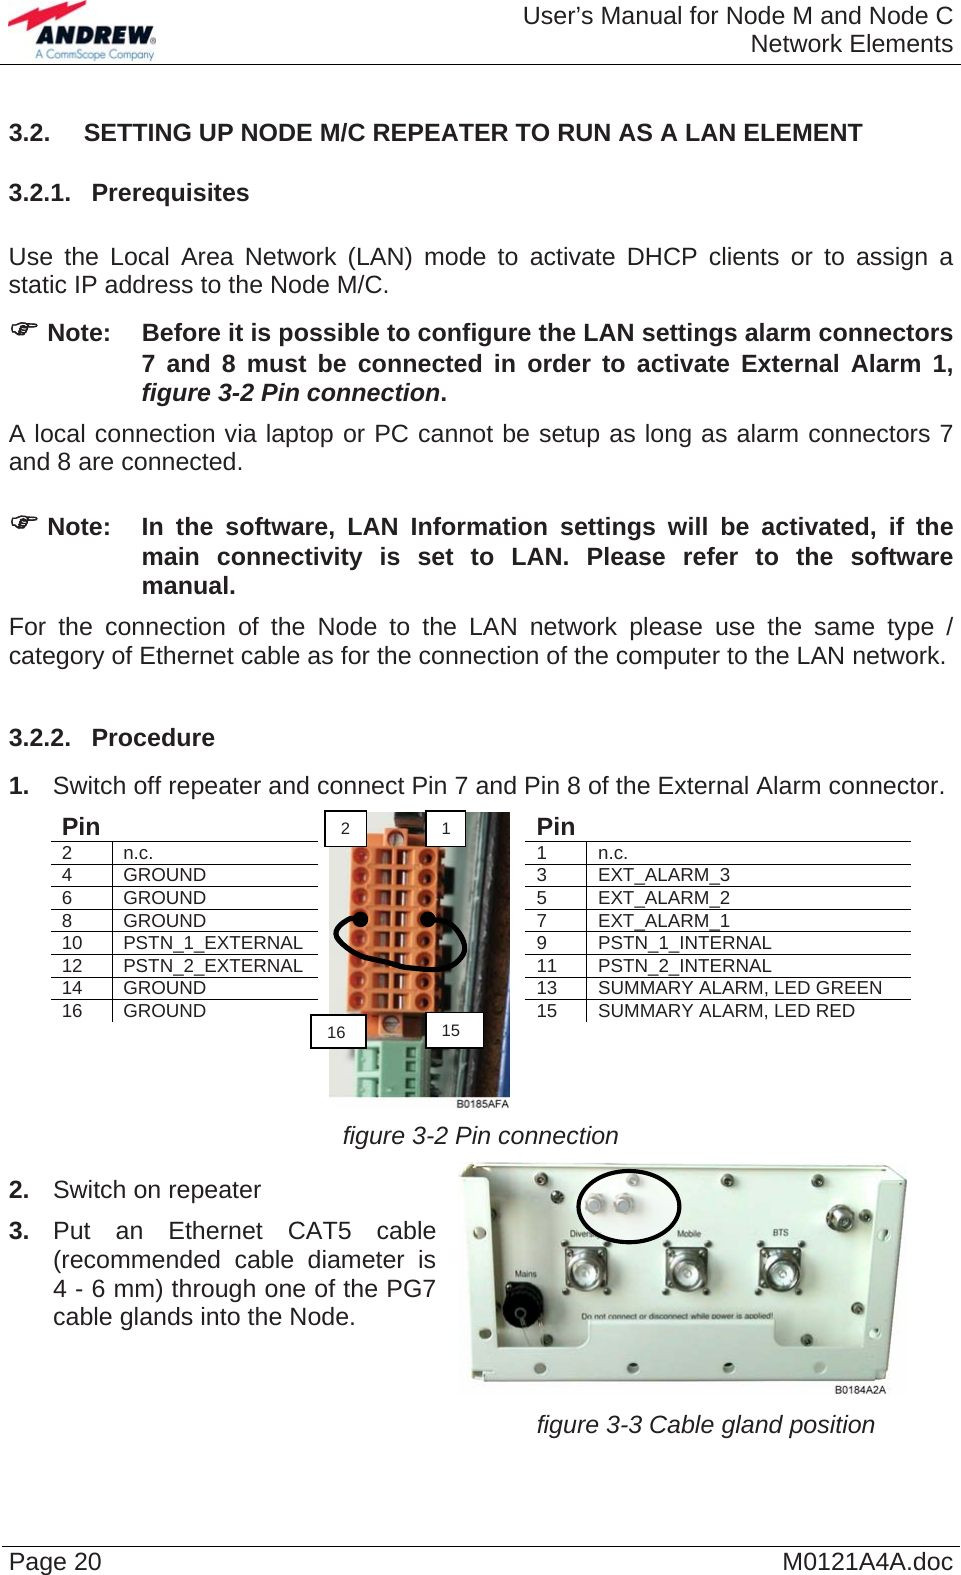  User’s Manual for Node M and Node CNetwork Elements Page 20  M0121A4A.doc3.2.  SETTING UP NODE M/C REPEATER TO RUN AS A LAN ELEMENT 3.2.1.  Prerequisites  Use the Local Area Network (LAN) mode to activate DHCP clients or to assign a static IP address to the Node M/C. ) Note:  Before it is possible to configure the LAN settings alarm connectors 7 and 8 must be connected in order to activate External Alarm 1, figure 3-2 Pin connection. A local connection via laptop or PC cannot be setup as long as alarm connectors 7 and 8 are connected.  ) Note:  In the software, LAN Information settings will be activated, if the main connectivity is set to LAN. Please refer to the software manual. For the connection of the Node to the LAN network please use the same type / category of Ethernet cable as for the connection of the computer to the LAN network.  3.2.2.  Procedure 1.  Switch off repeater and connect Pin 7 and Pin 8 of the External Alarm connector. Pin   Pin  2 n.c. 1 n.c. 4 GROUND 3 EXT_ALARM_3 6 GROUND 5 EXT_ALARM_2 8 GROUND 7 EXT_ALARM_1  10 PSTN_1_EXTERNAL 9 PSTN_1_INTERNAL 12 PSTN_2_EXTERNAL 11 PSTN_2_INTERNAL 14 GROUND 13 SUMMARY ALARM, LED GREEN 16 GROUND 15 SUMMARY ALARM, LED RED                 figure 3-2 Pin connection 2.  Switch on repeater 3. Put an Ethernet CAT5 cable (recommended cable diameter is 4 - 6 mm) through one of the PG7 cable glands into the Node.     figure 3-3 Cable gland position 2  11516  